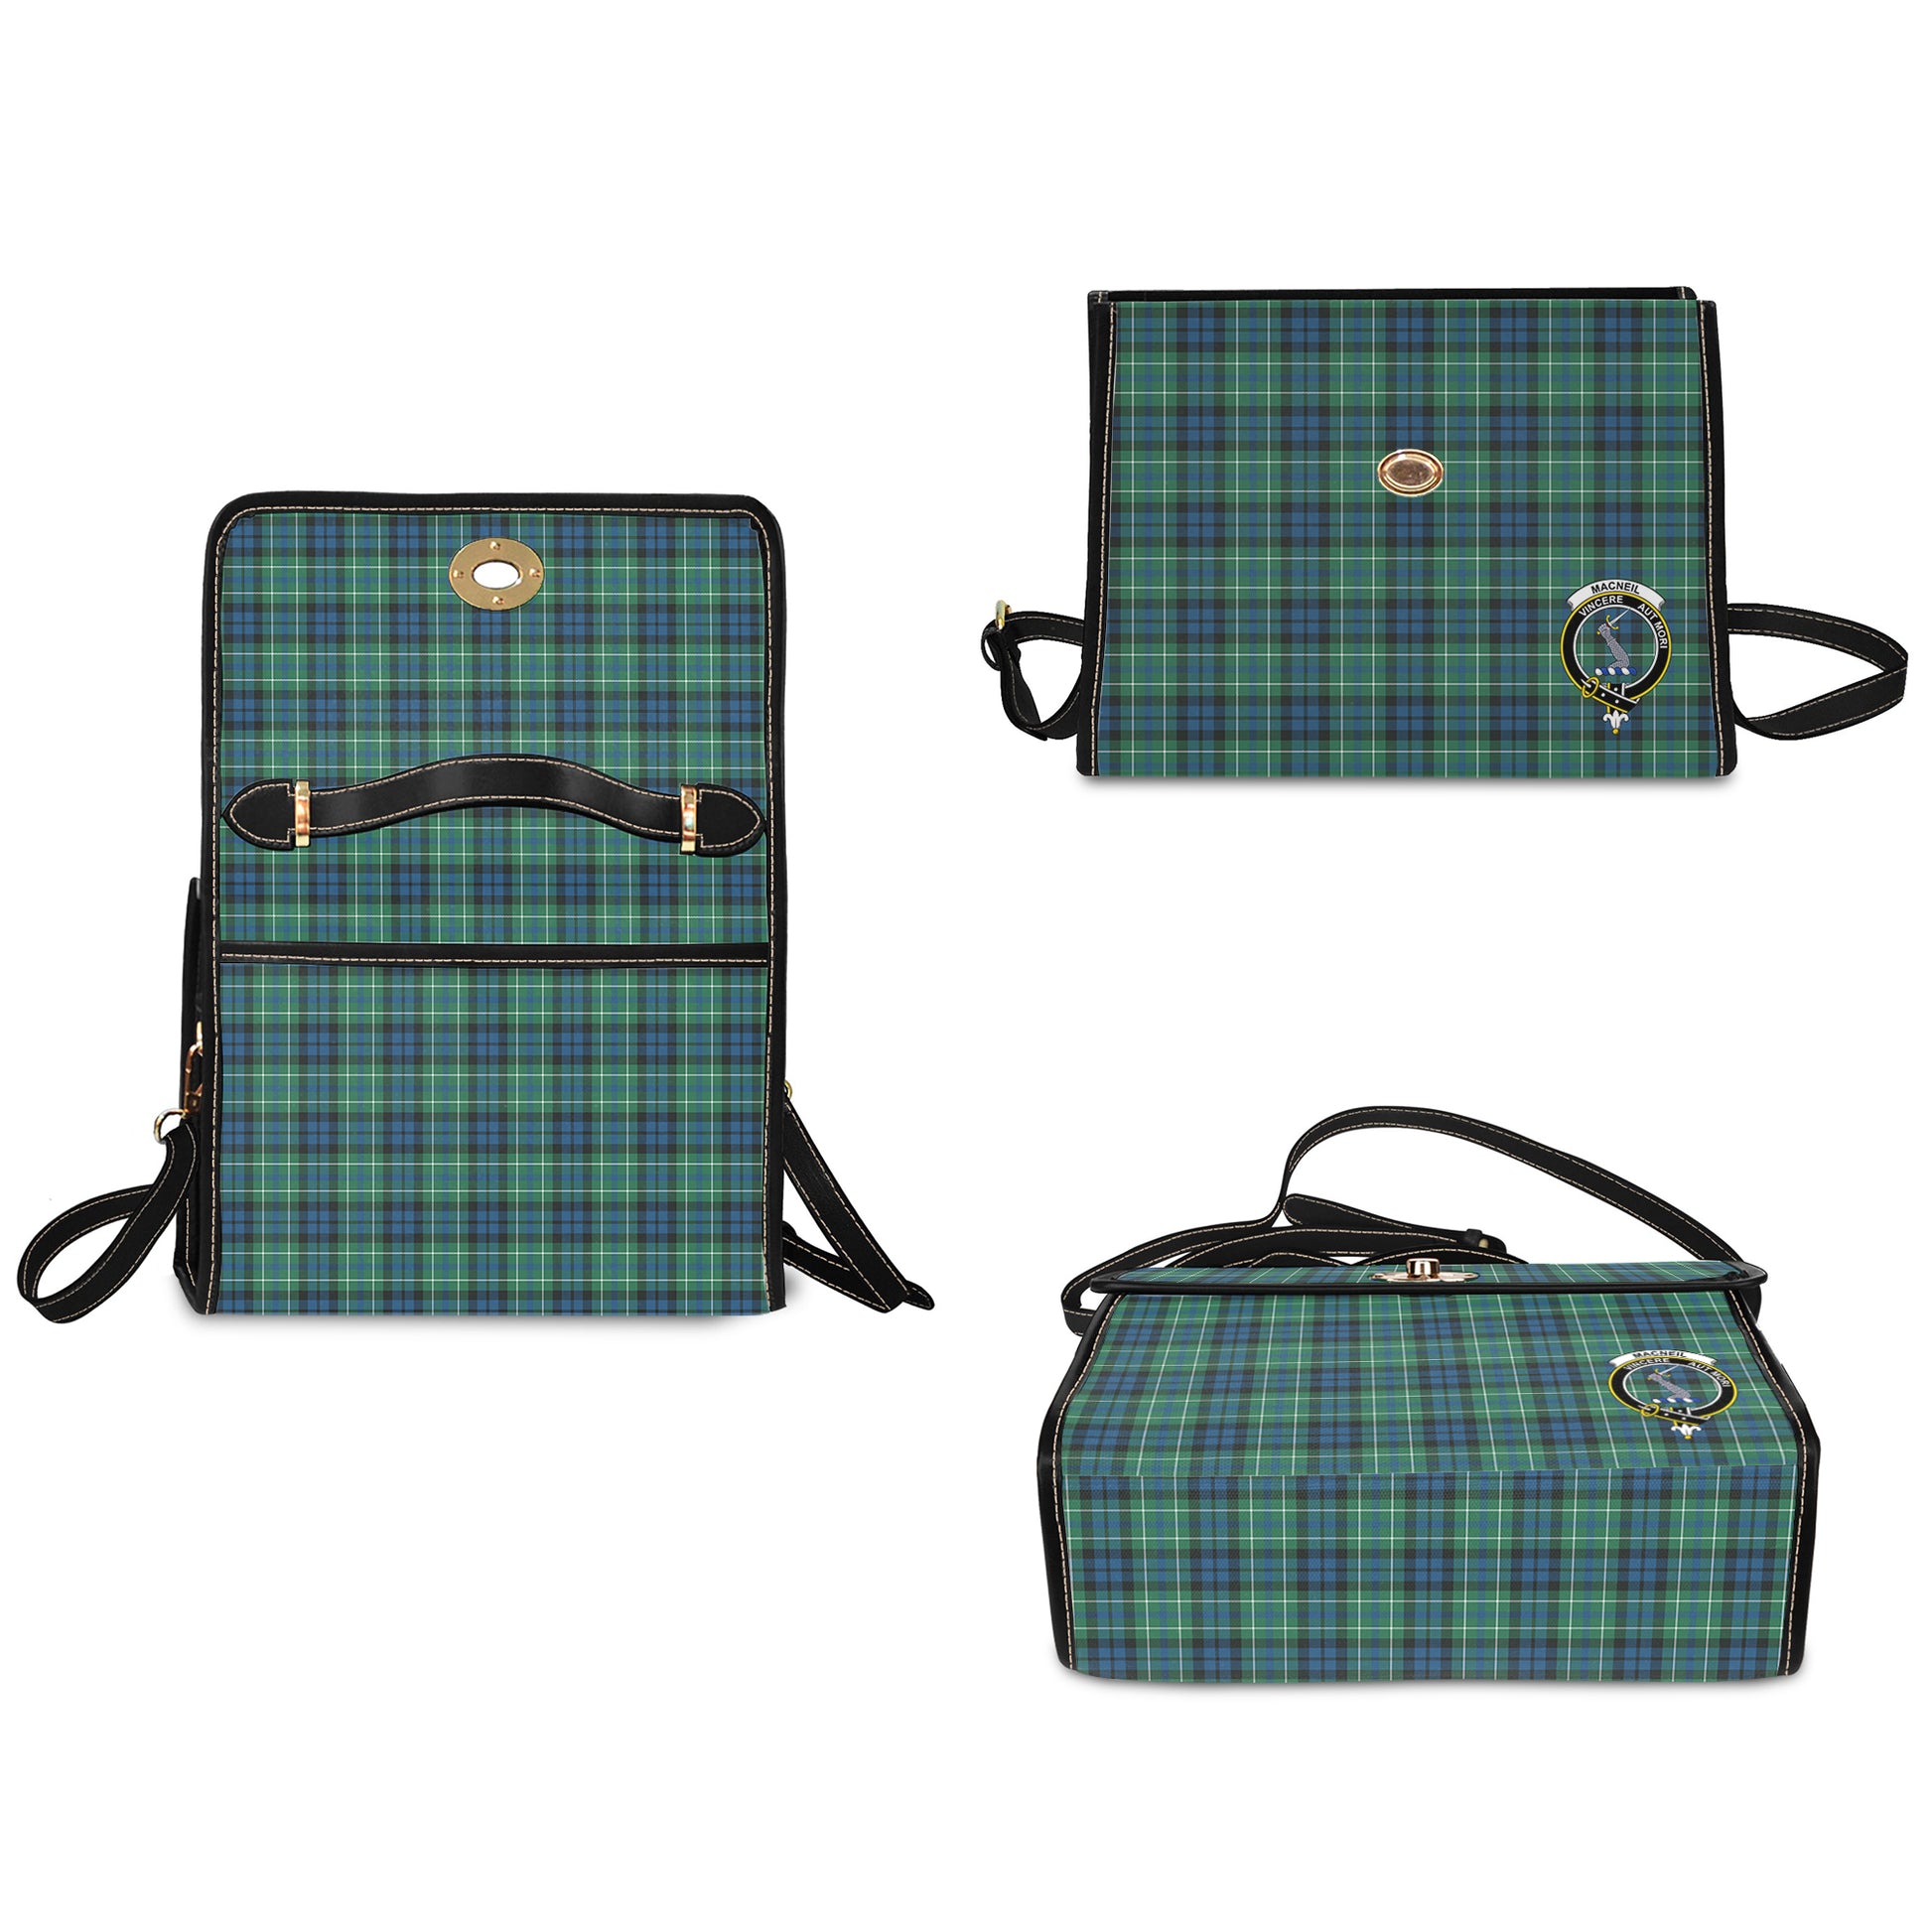 macneil-of-colonsay-ancient-tartan-leather-strap-waterproof-canvas-bag-with-family-crest